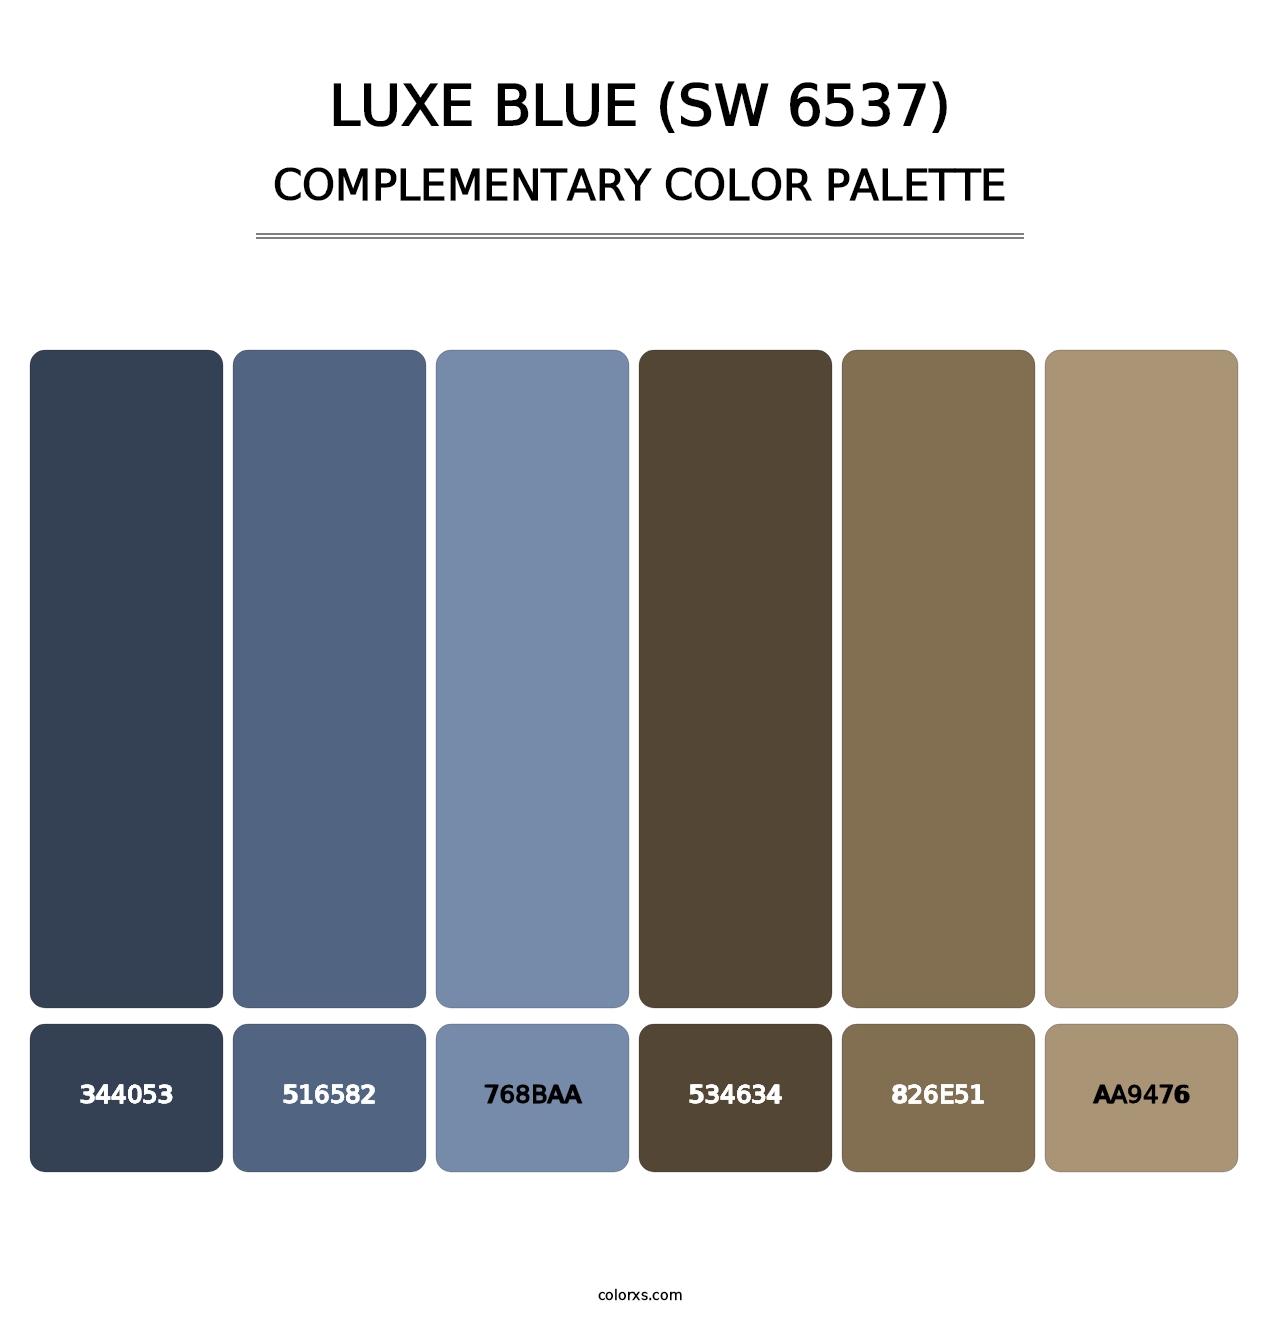 Luxe Blue (SW 6537) - Complementary Color Palette